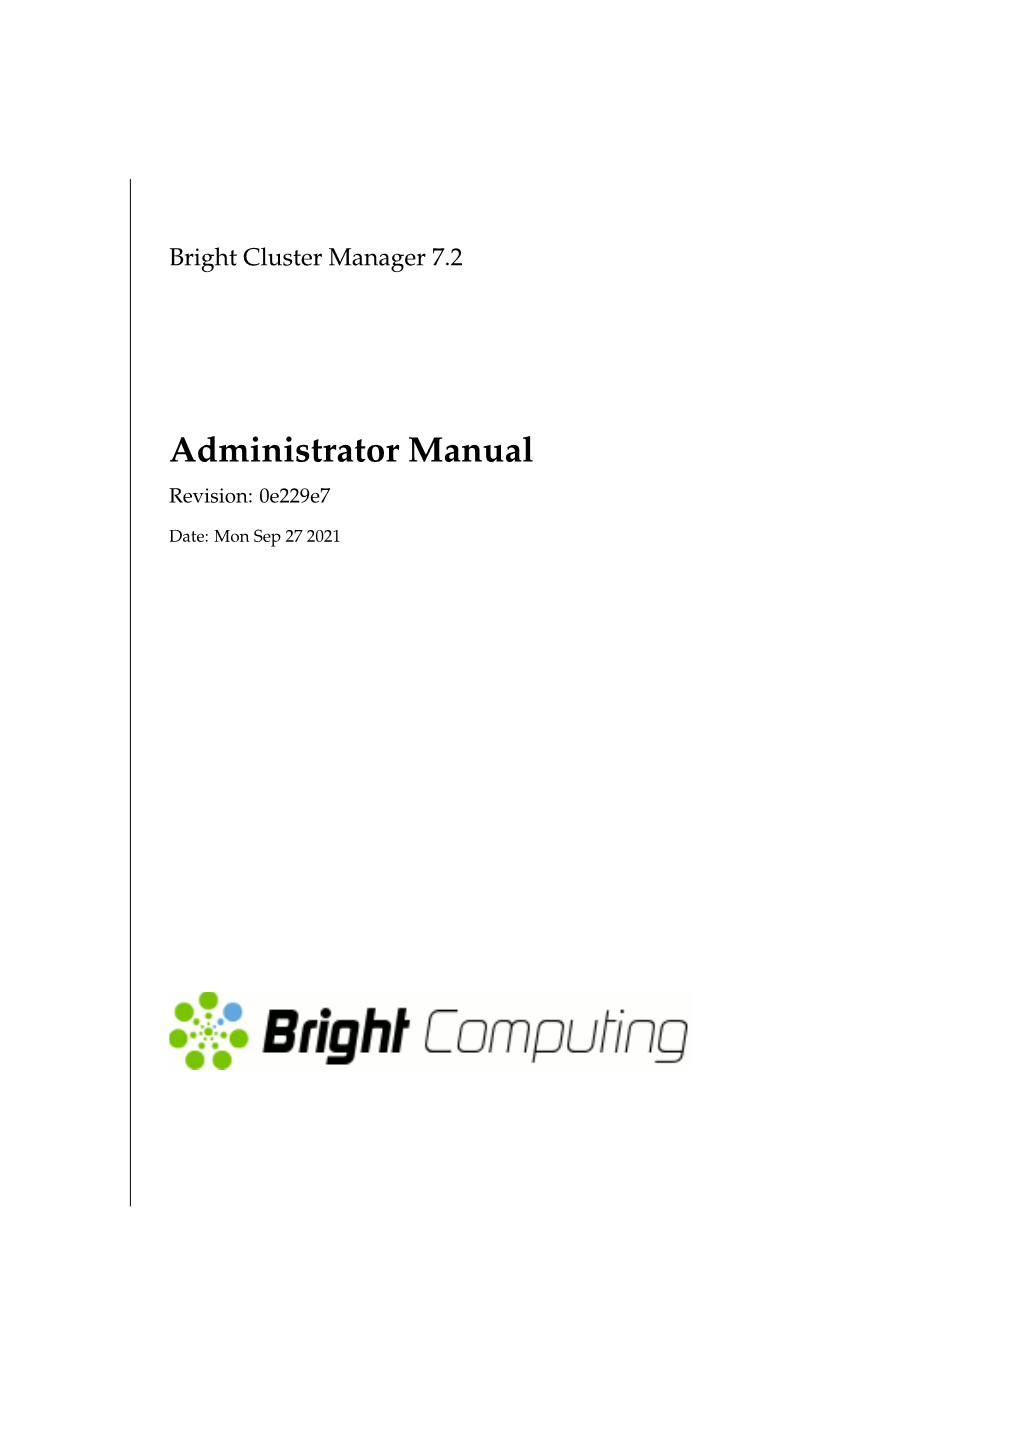 Section 7.9.2 of the Administrator Manual